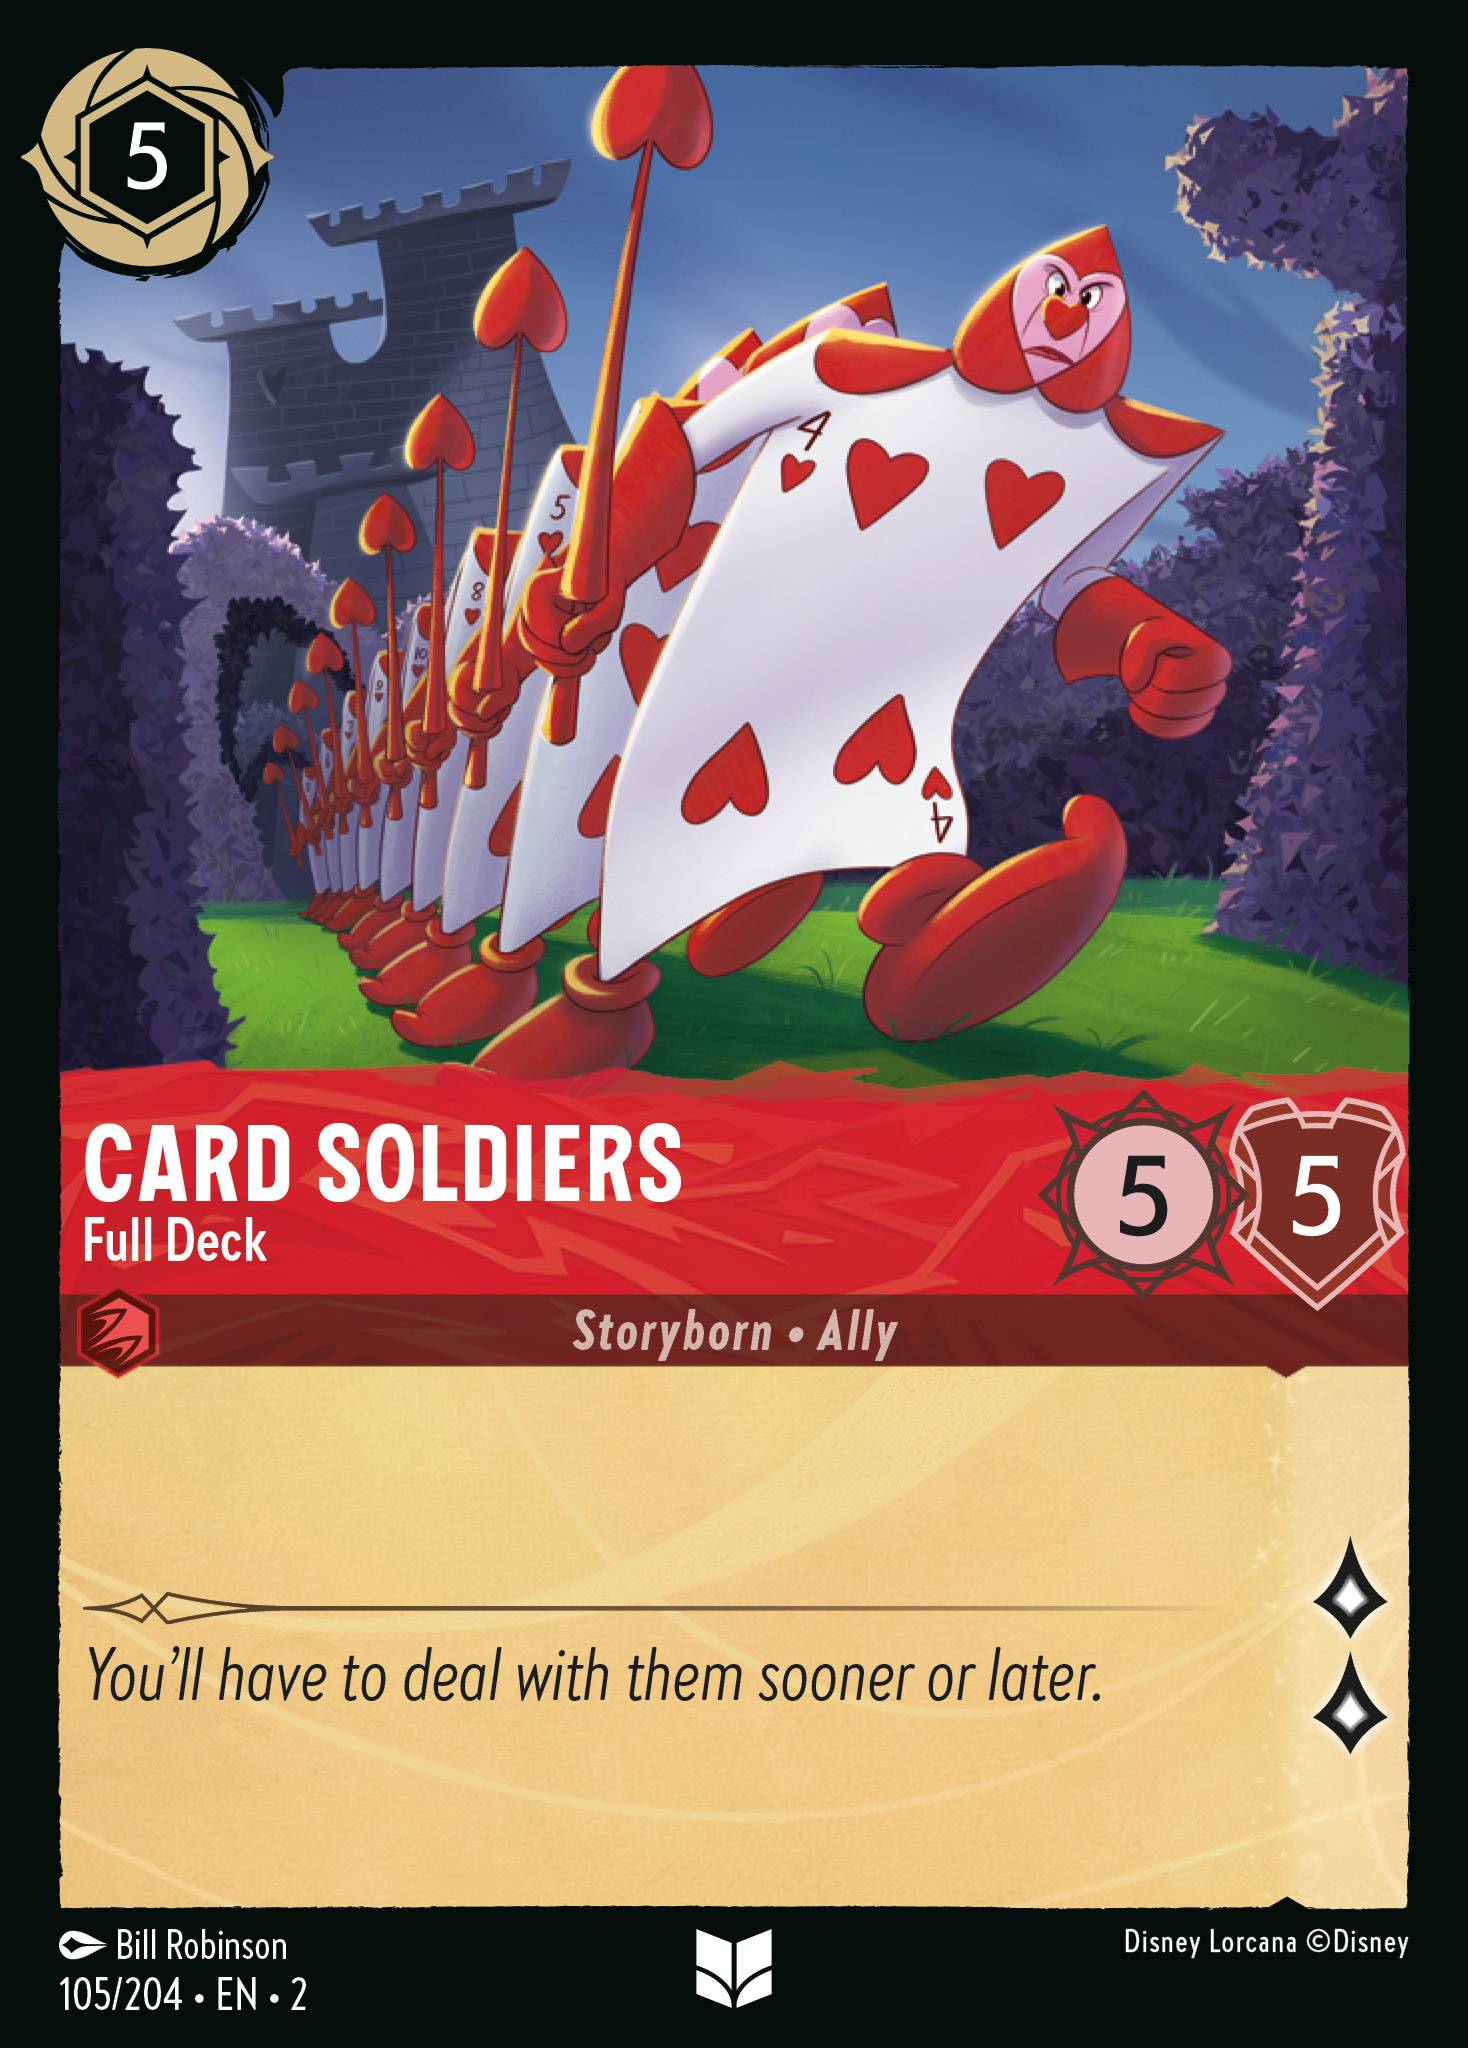 Card Soldiers - Full Deck ROTF foil